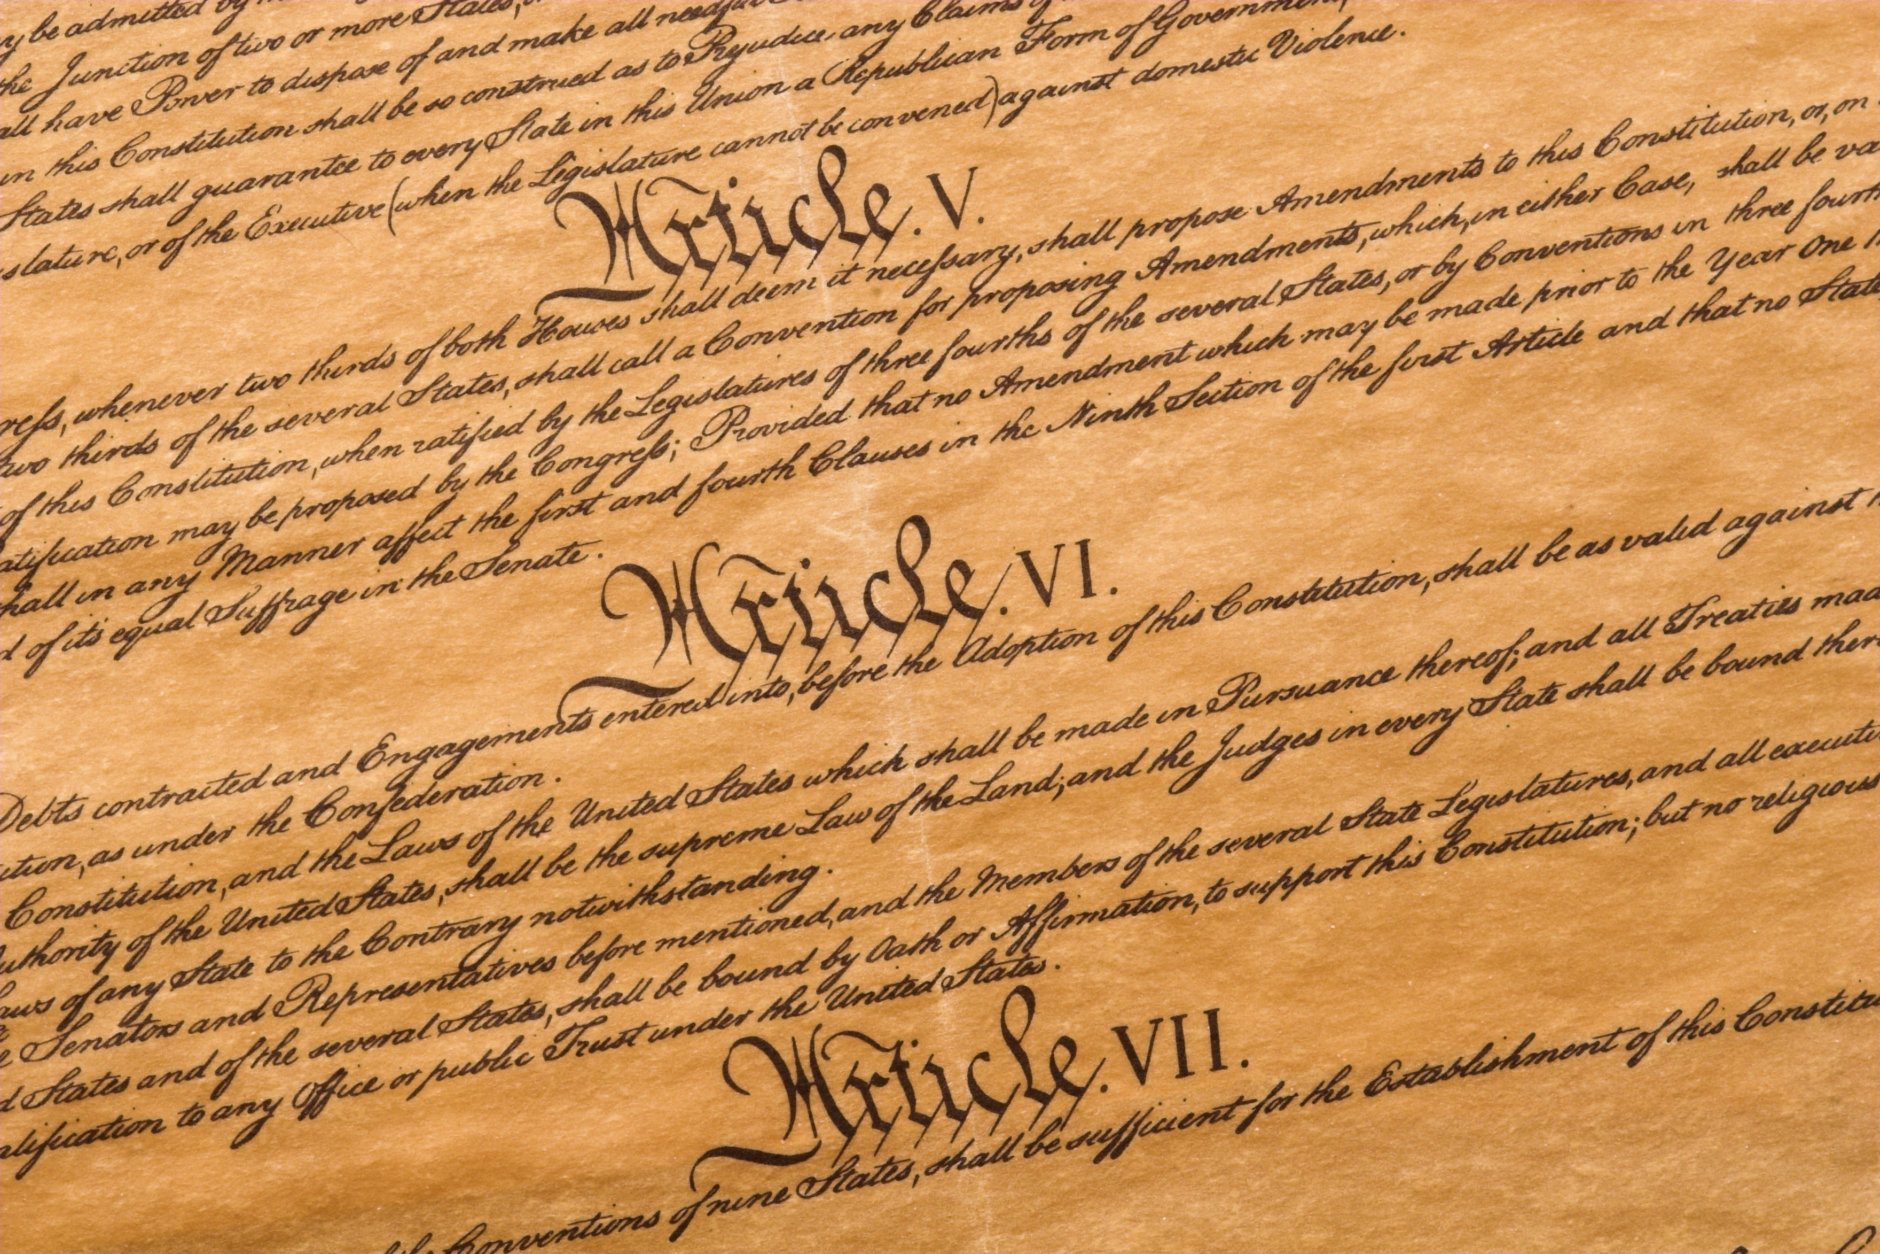 Detail of the United States Constitution